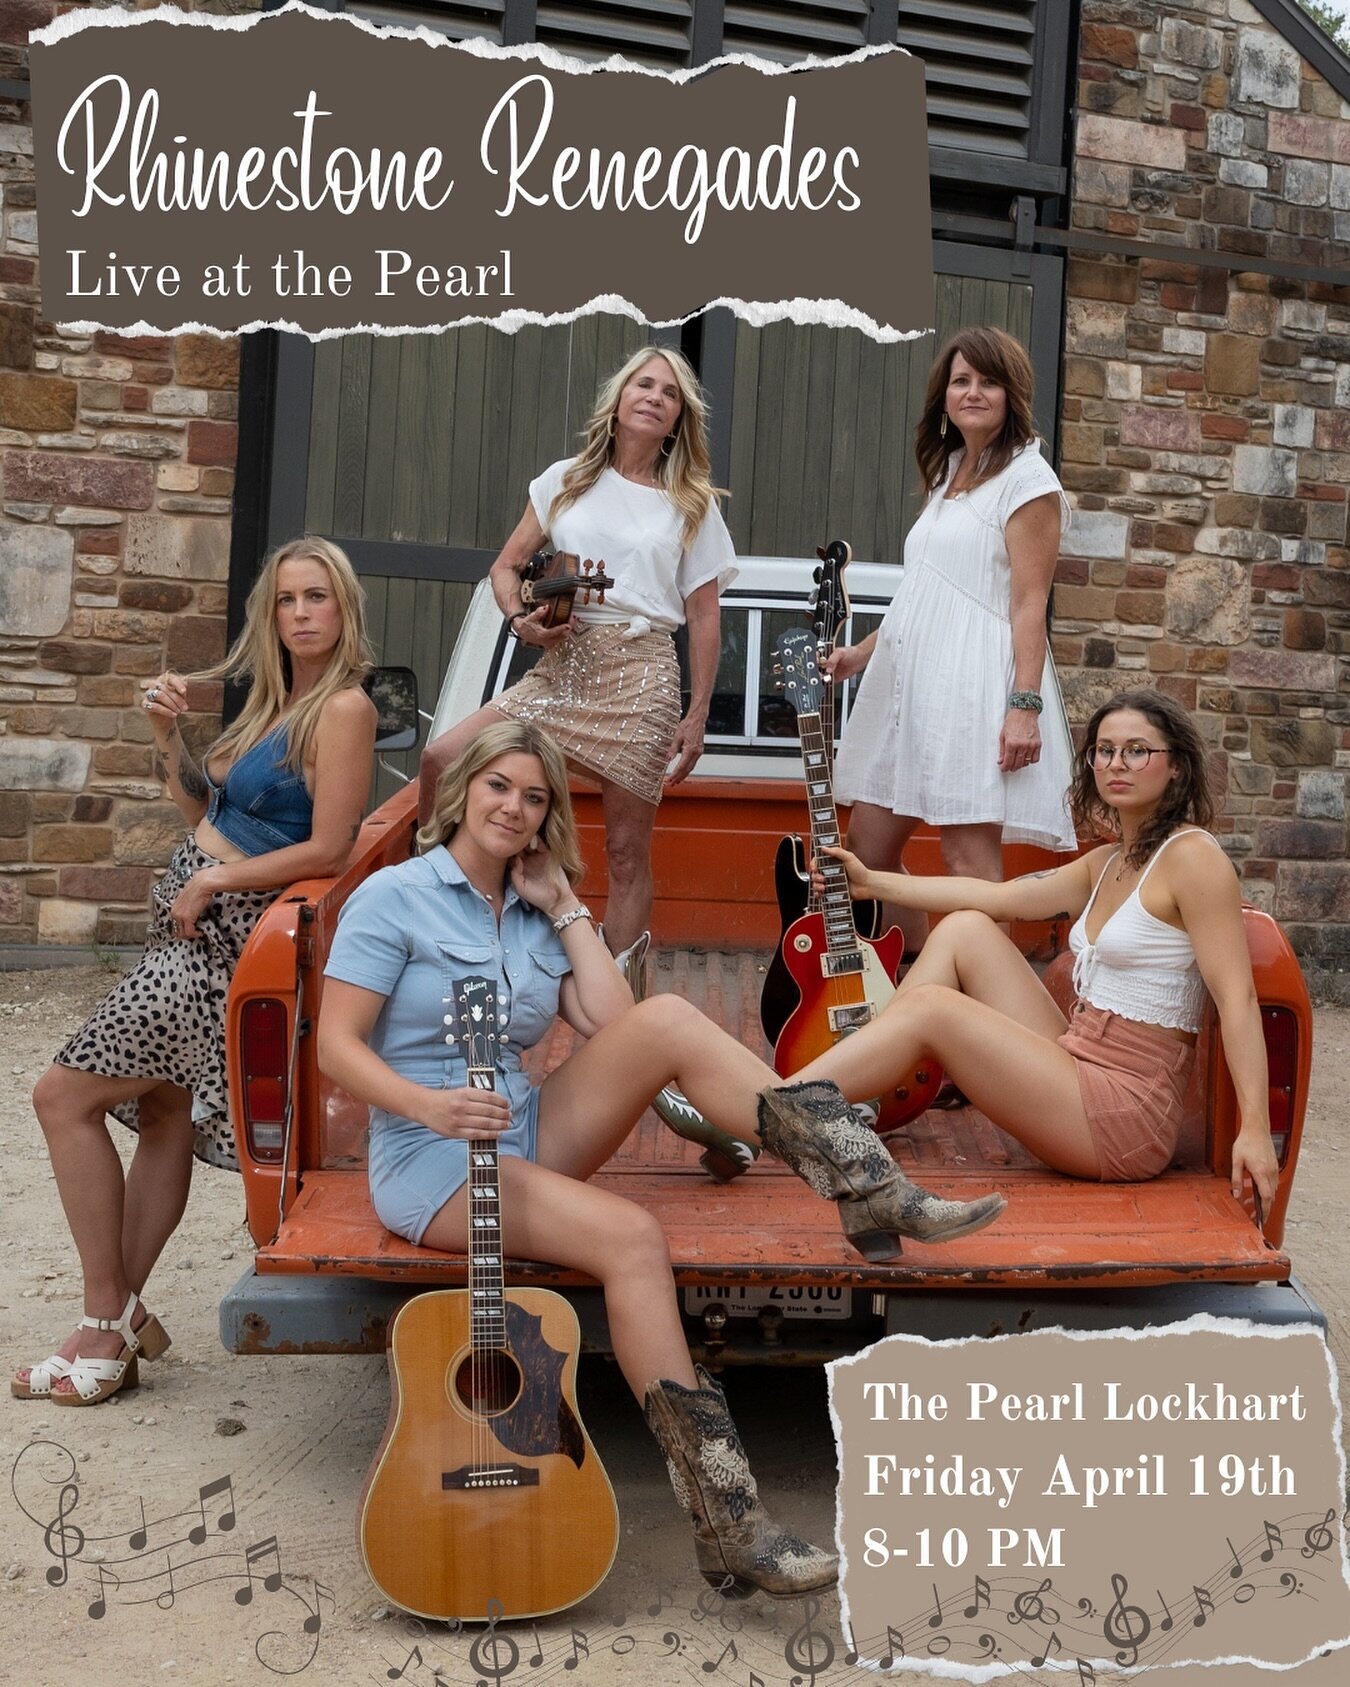 We&rsquo;ll be playing at The Pearl in Lockhart on Friday April 19th from 8-10 PM! We can&rsquo;t wait to take the stage of this true Lockhart staple!
.
.
#rhinestonerenegades #countrycoverband #countrygirlband #femalecoverband #turnpiketroubadours #